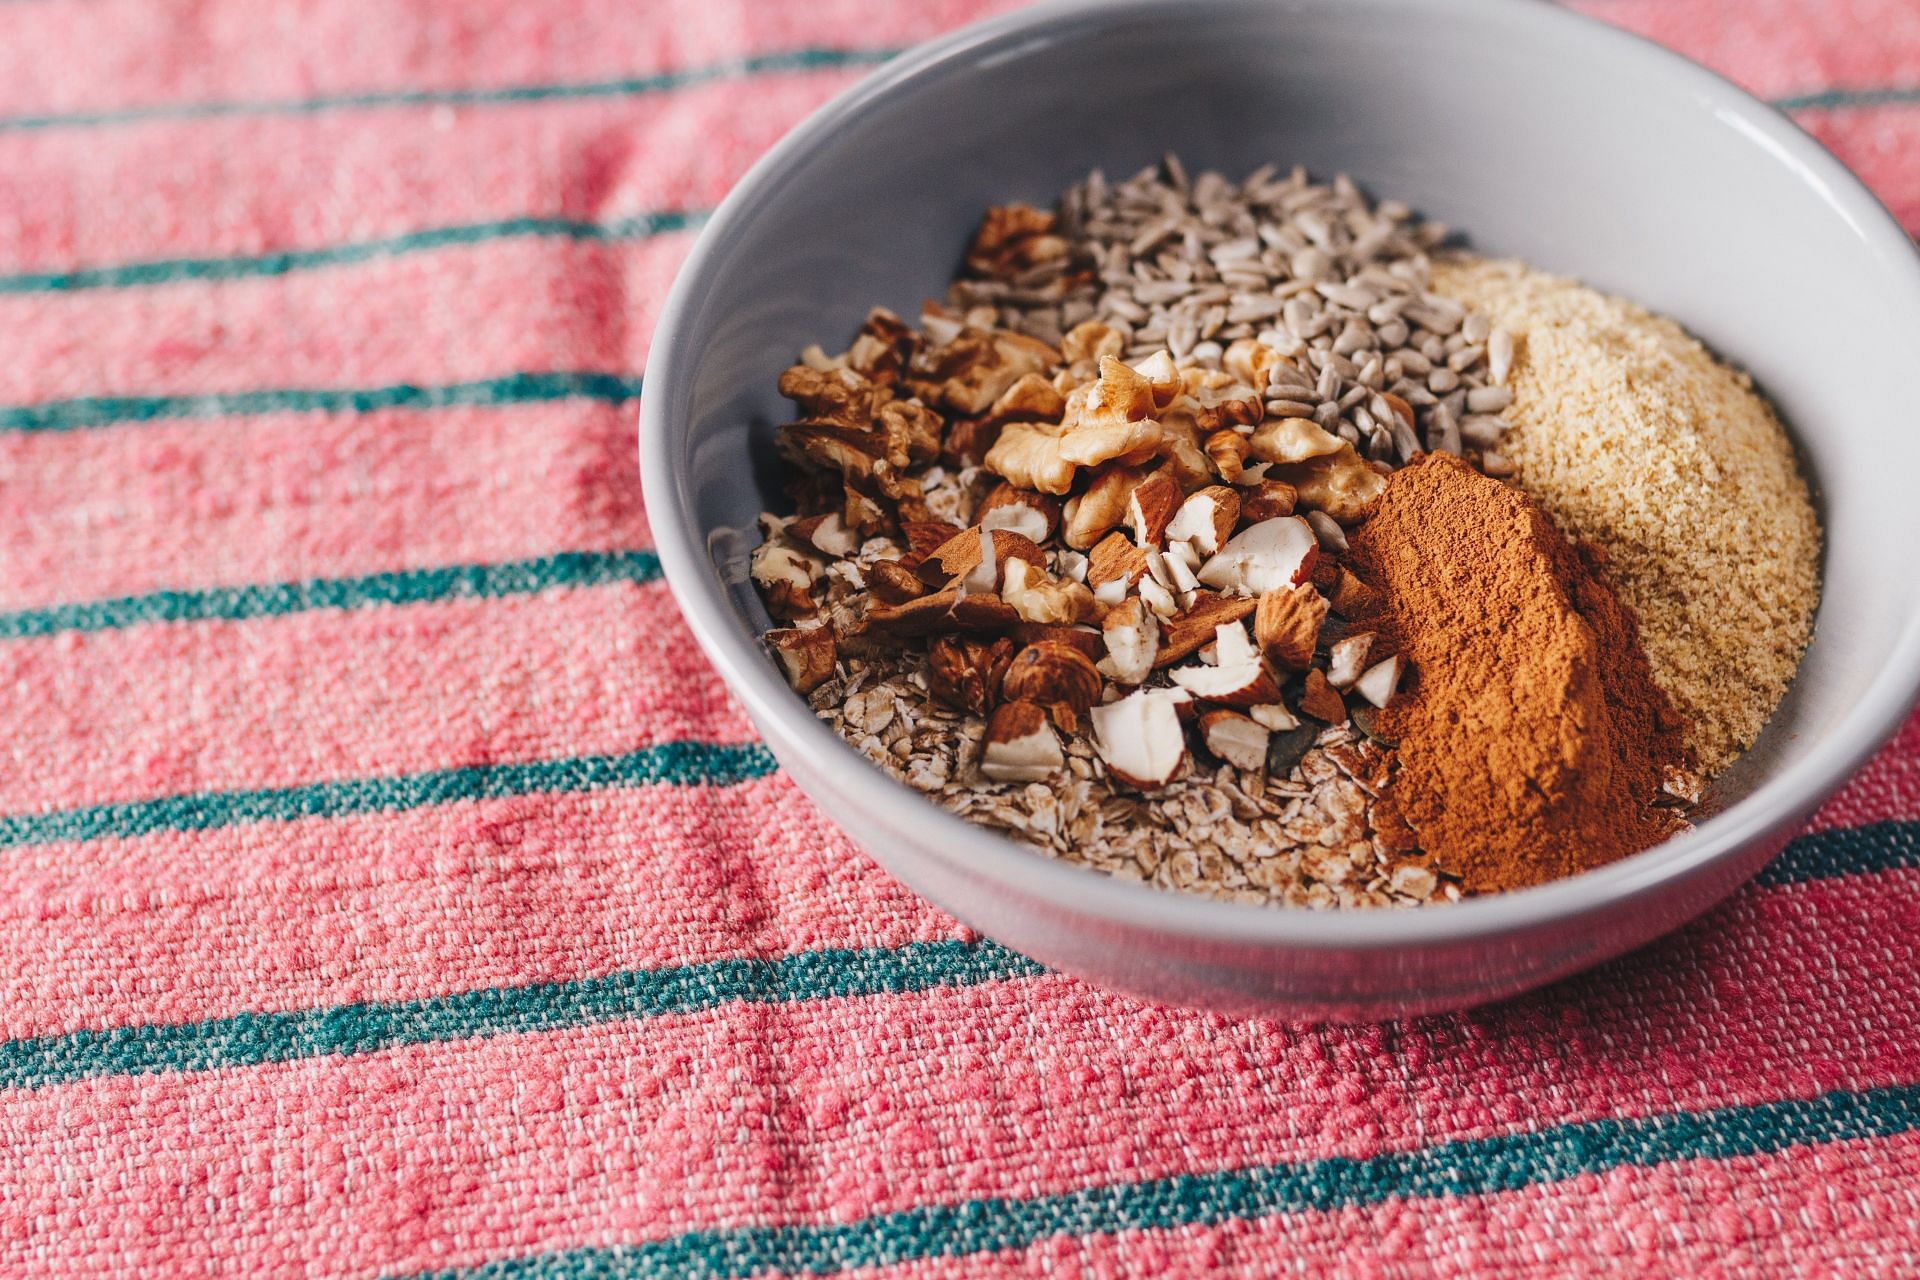 A bowl of nuts and seeds are rich in vitamin E. (Image via Pexels)